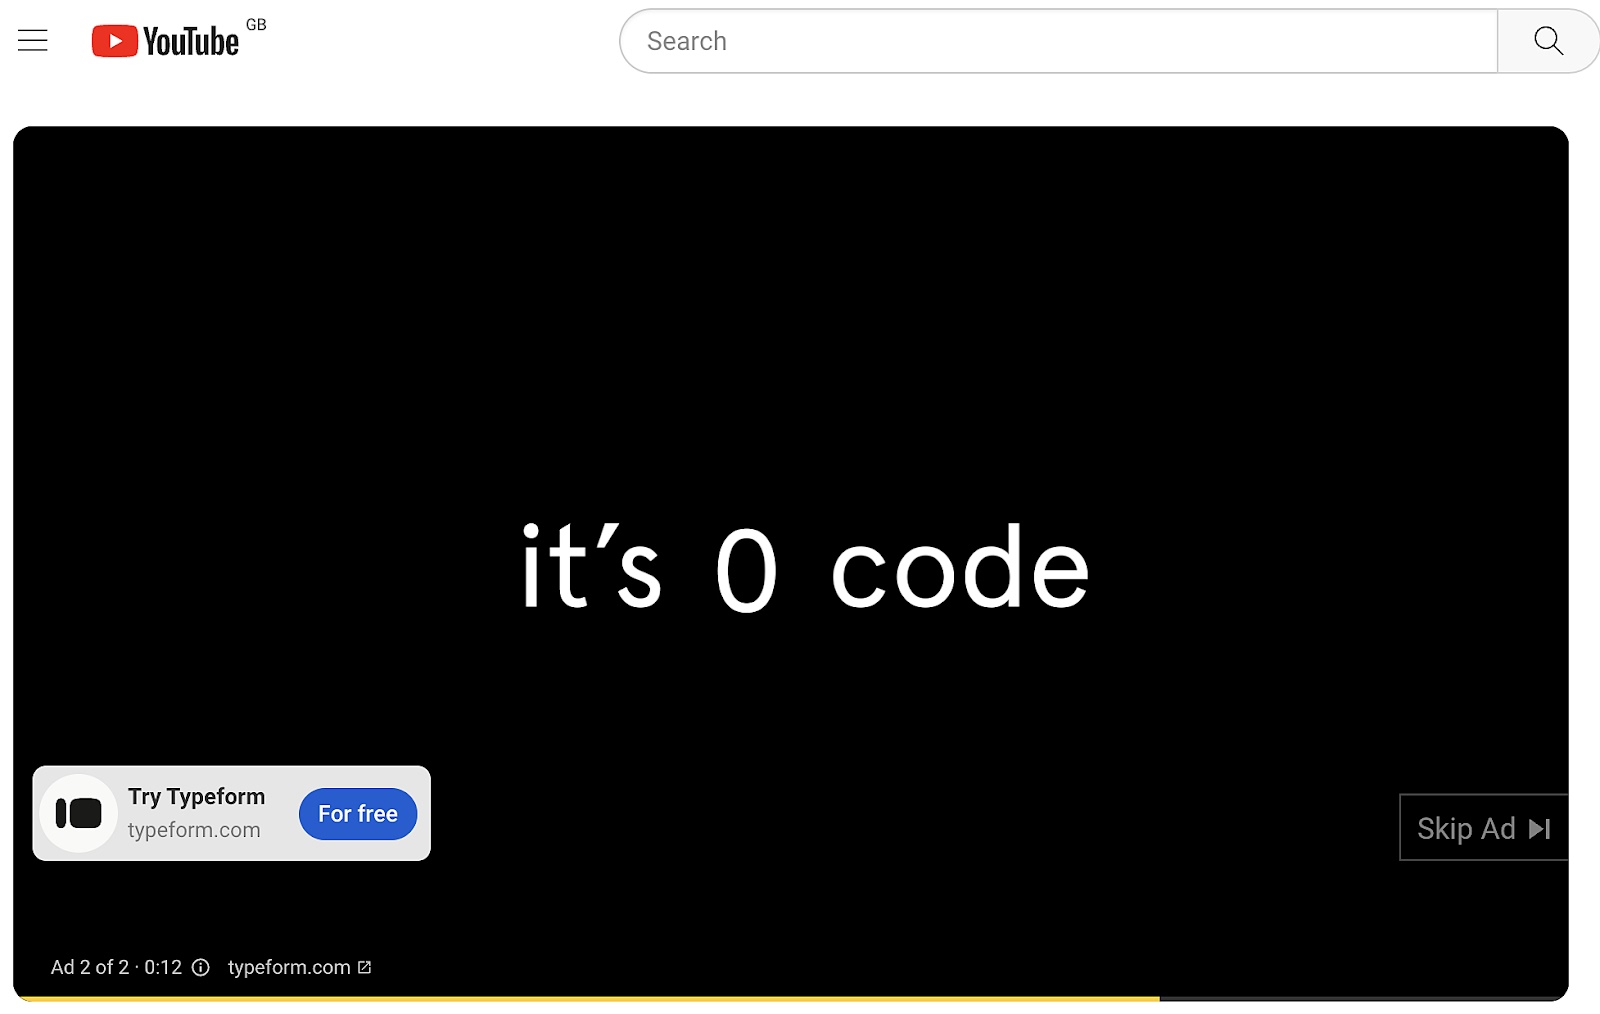 A screens،t of Typeform's video ad with "it's 0 code" copy